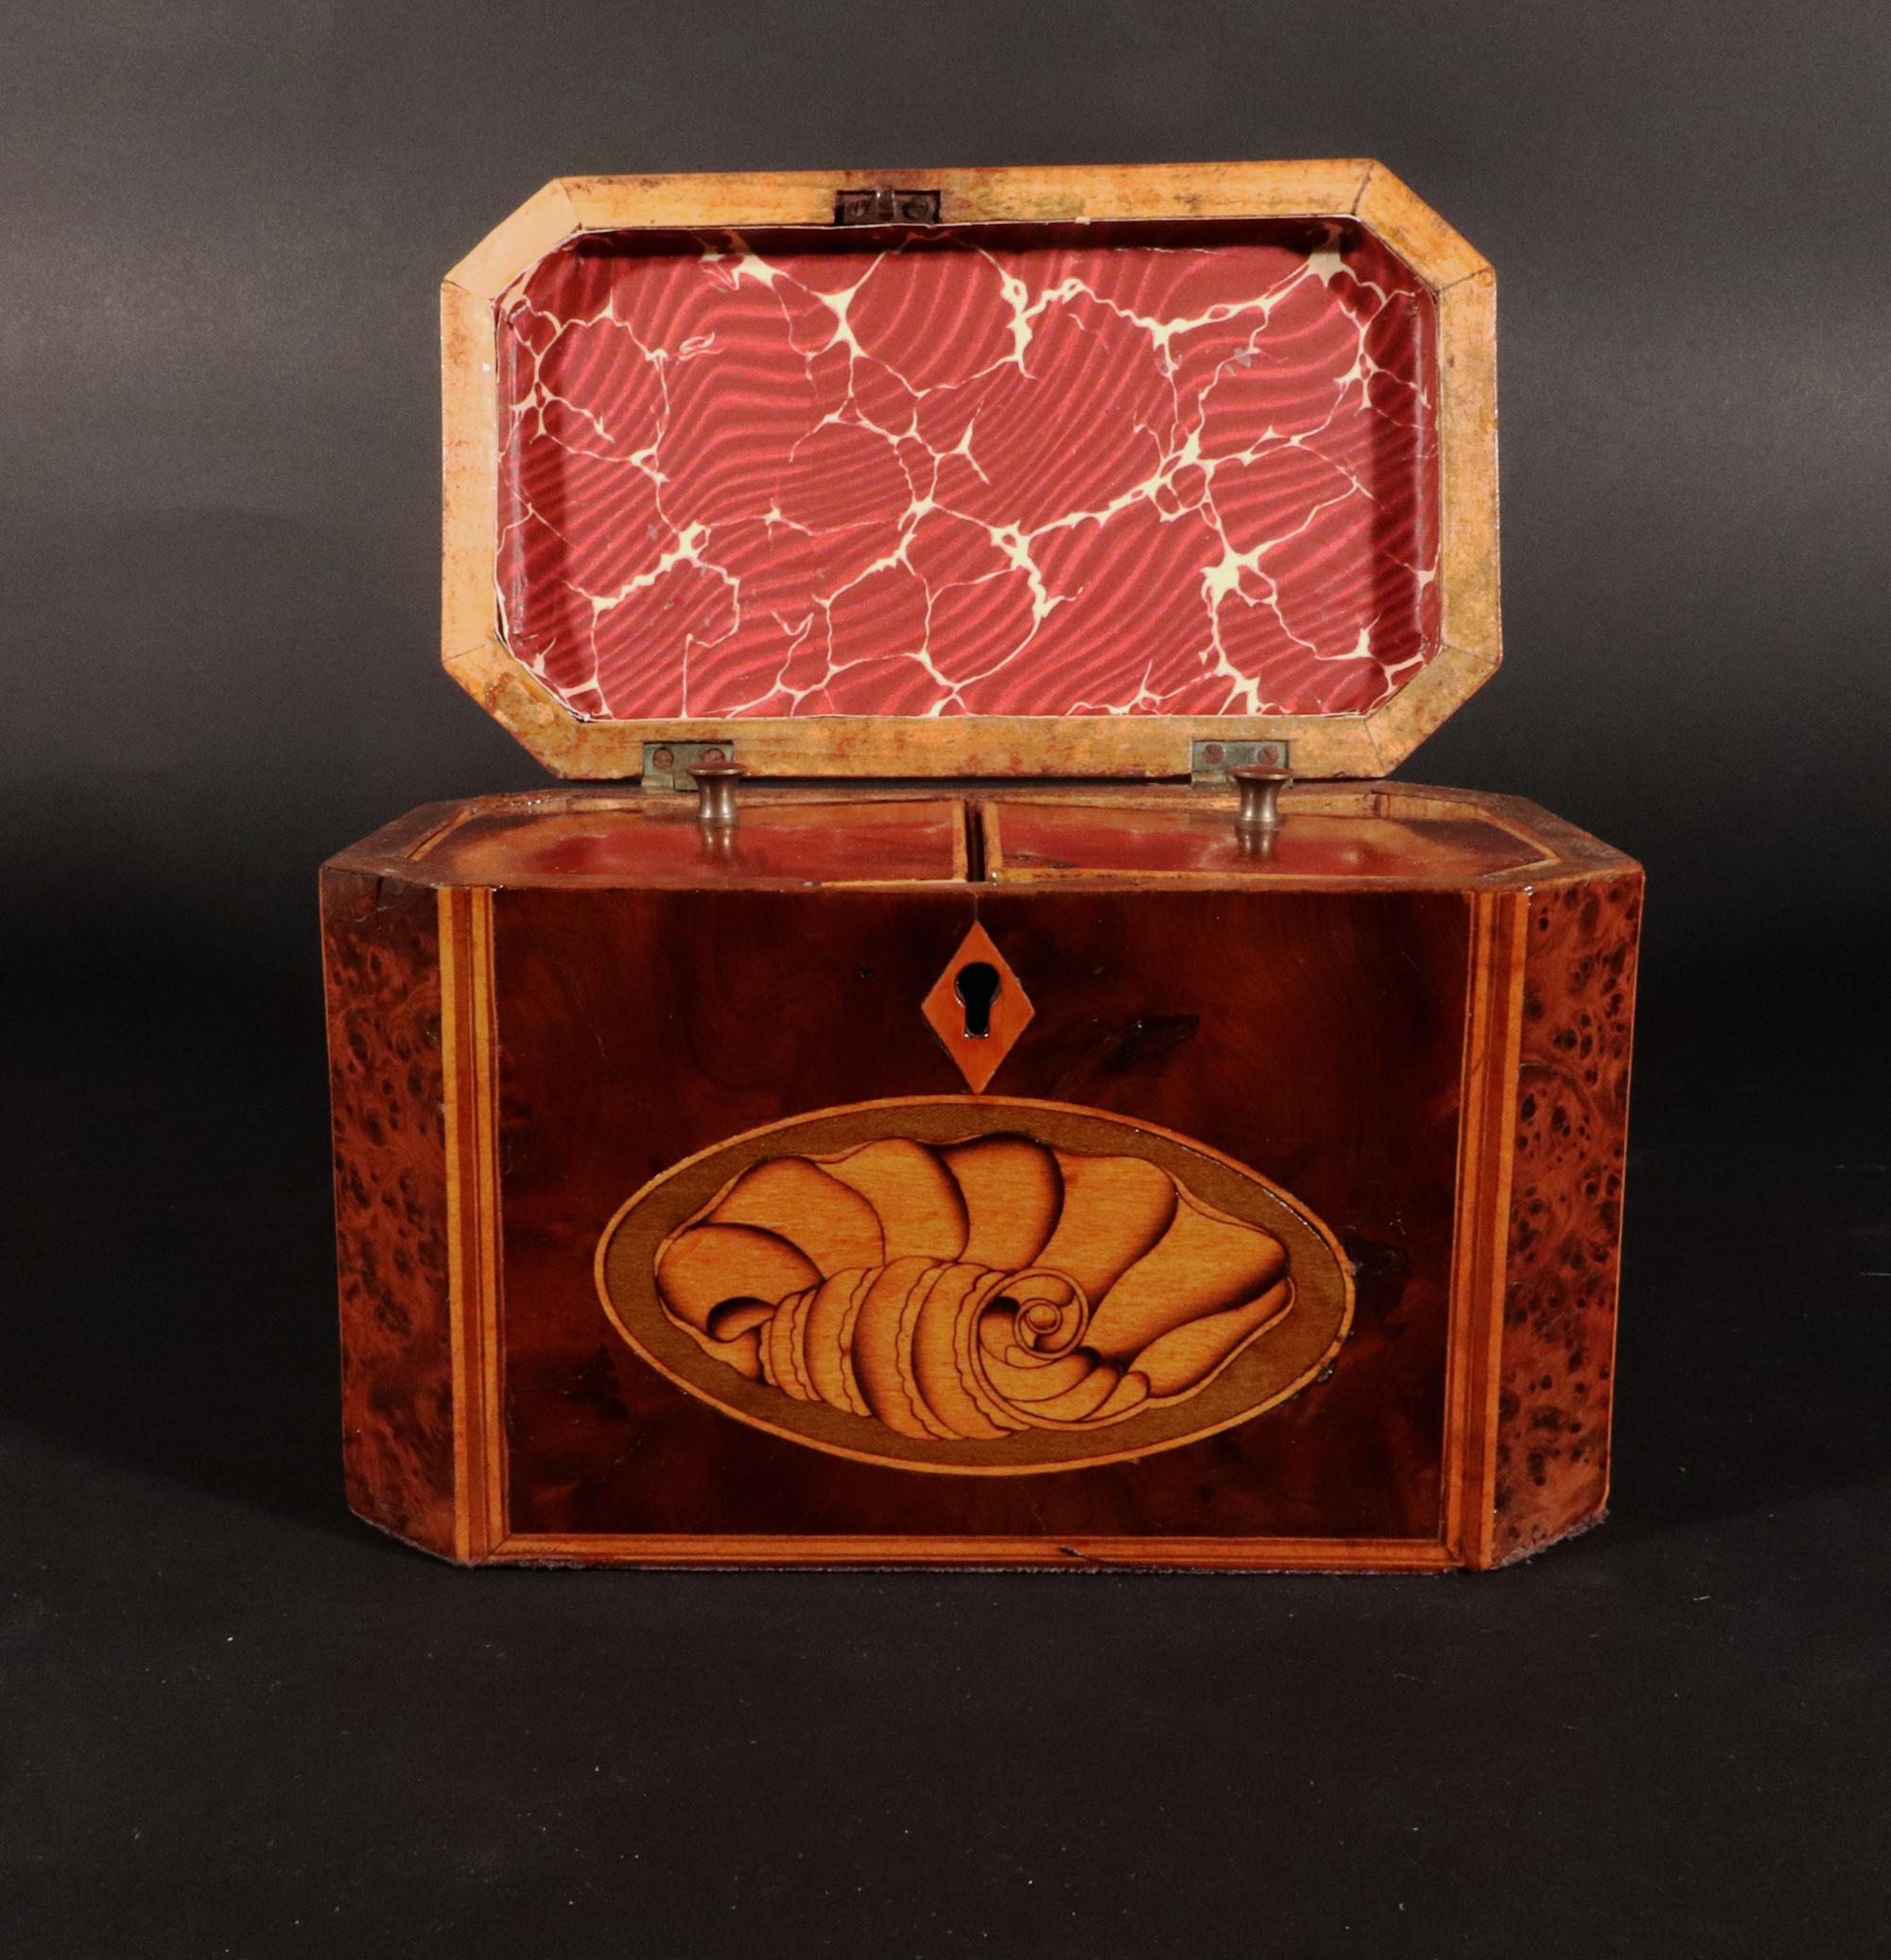 George III Burl Yew and Satinwood Octagonal Tea Caddy with Conch Shell Panels,
Circa, 1790, 

The burl yew double tea caddy is of an octagonal form with canted corners. The interior with two section for different types of tea, the sections with